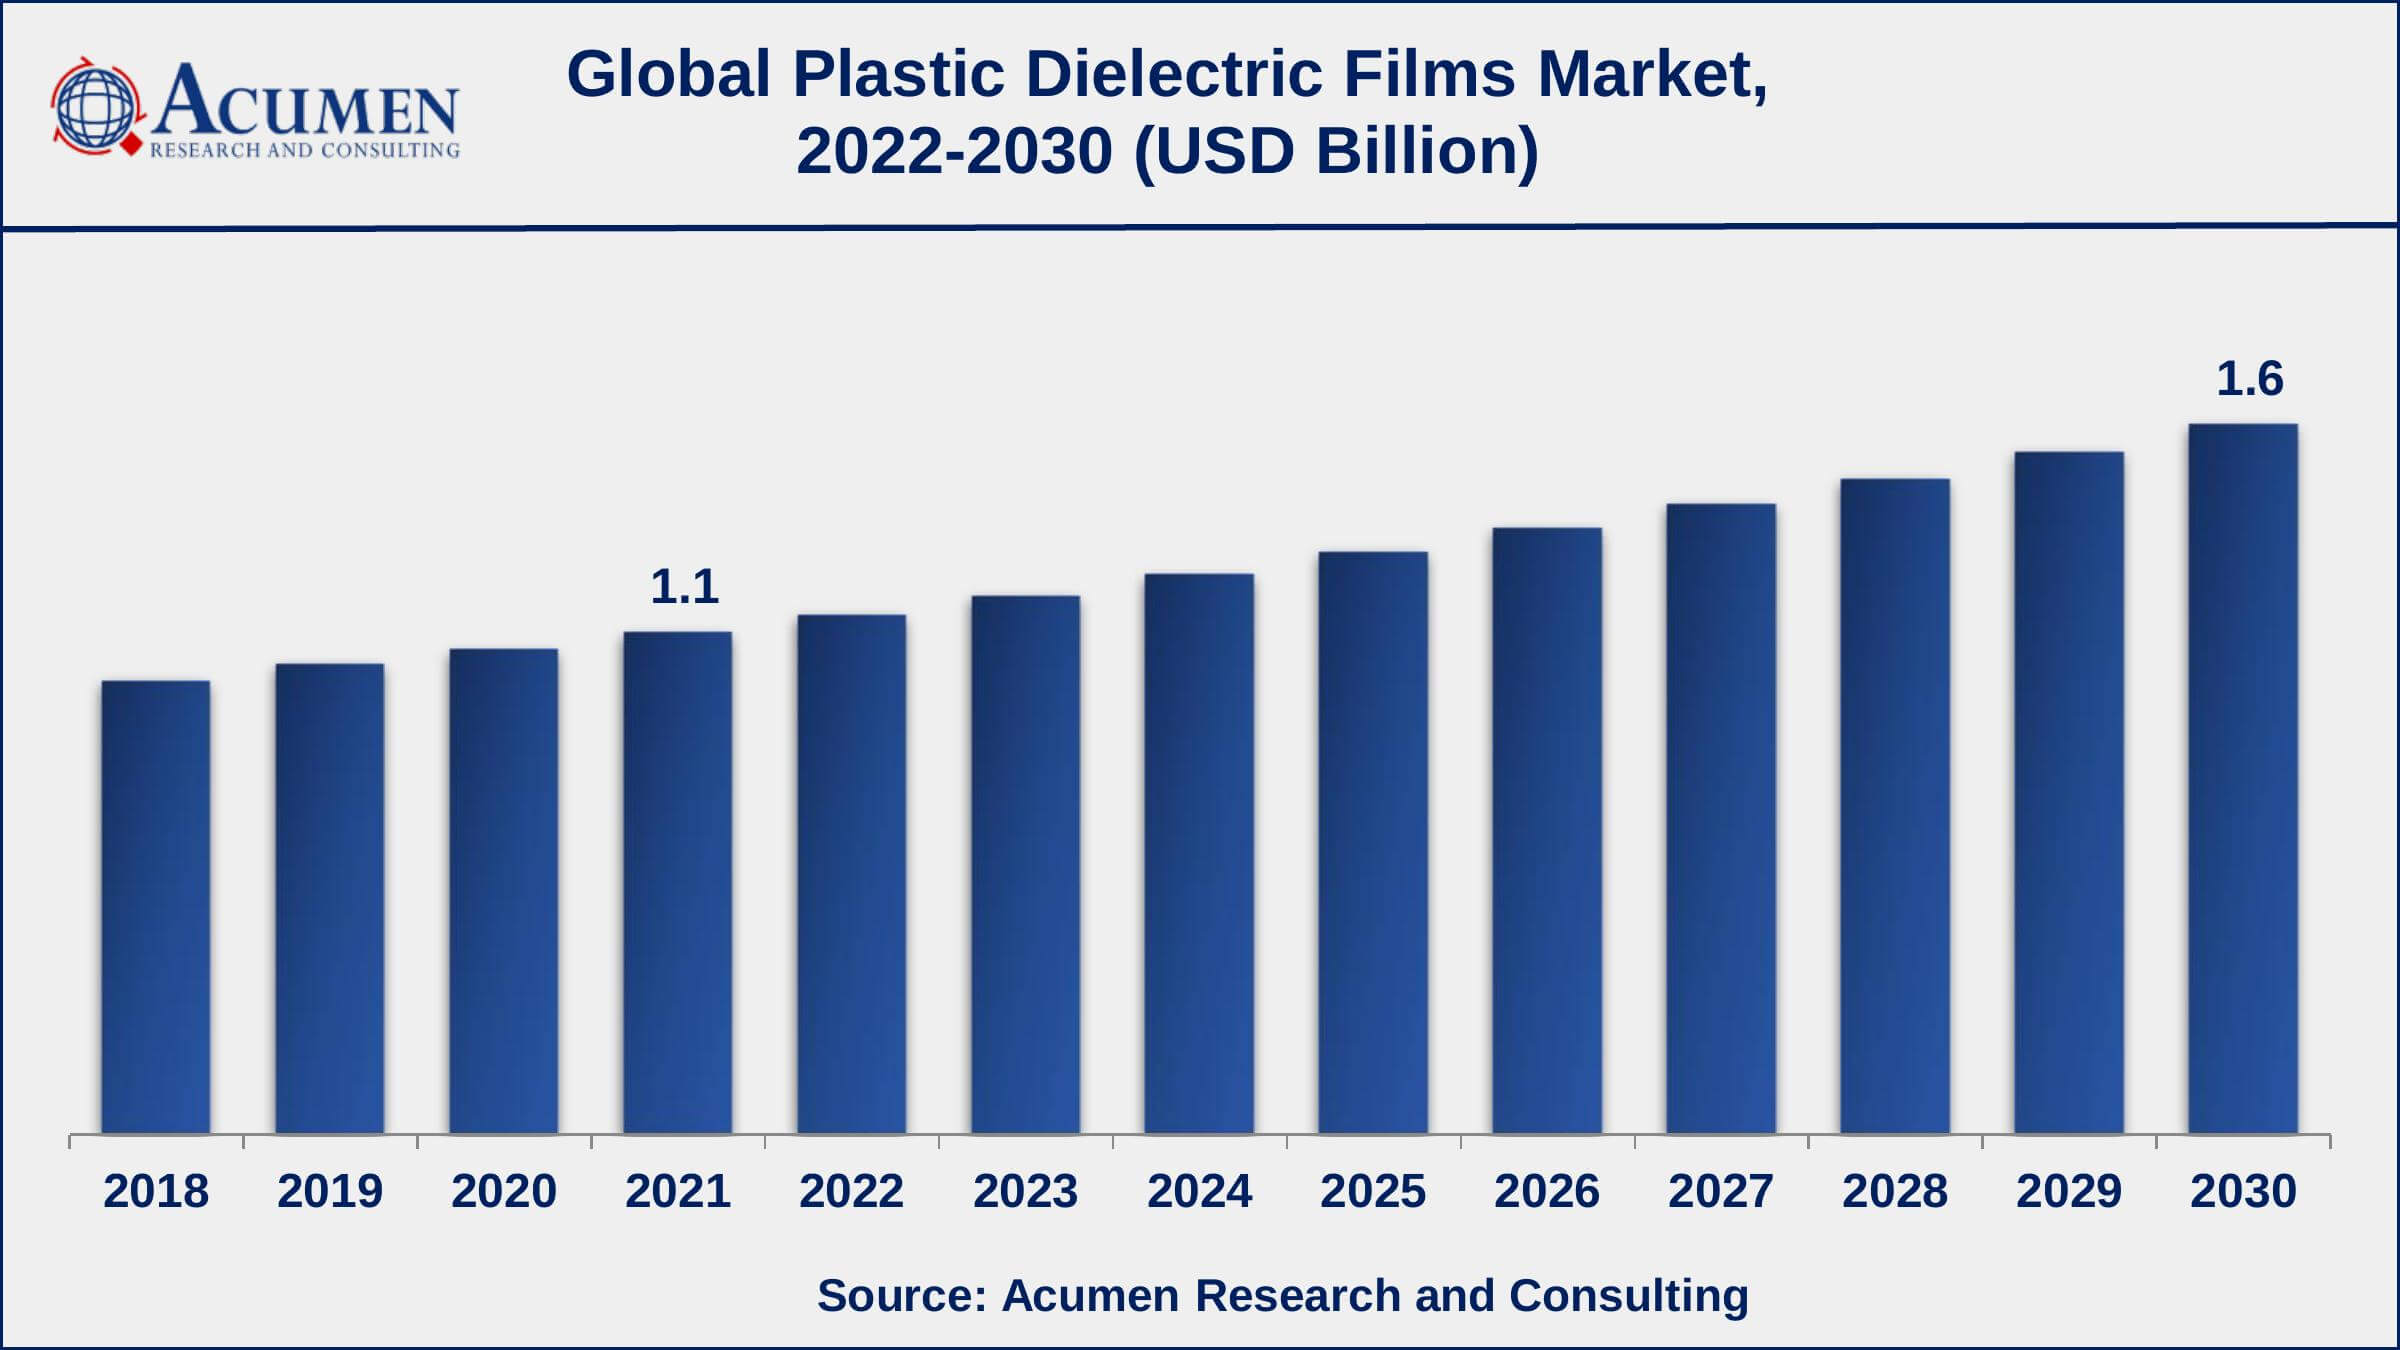 North America plastic dielectric films market growth will record noteworthy CAGR of over 4.5% from 2022 to 2030